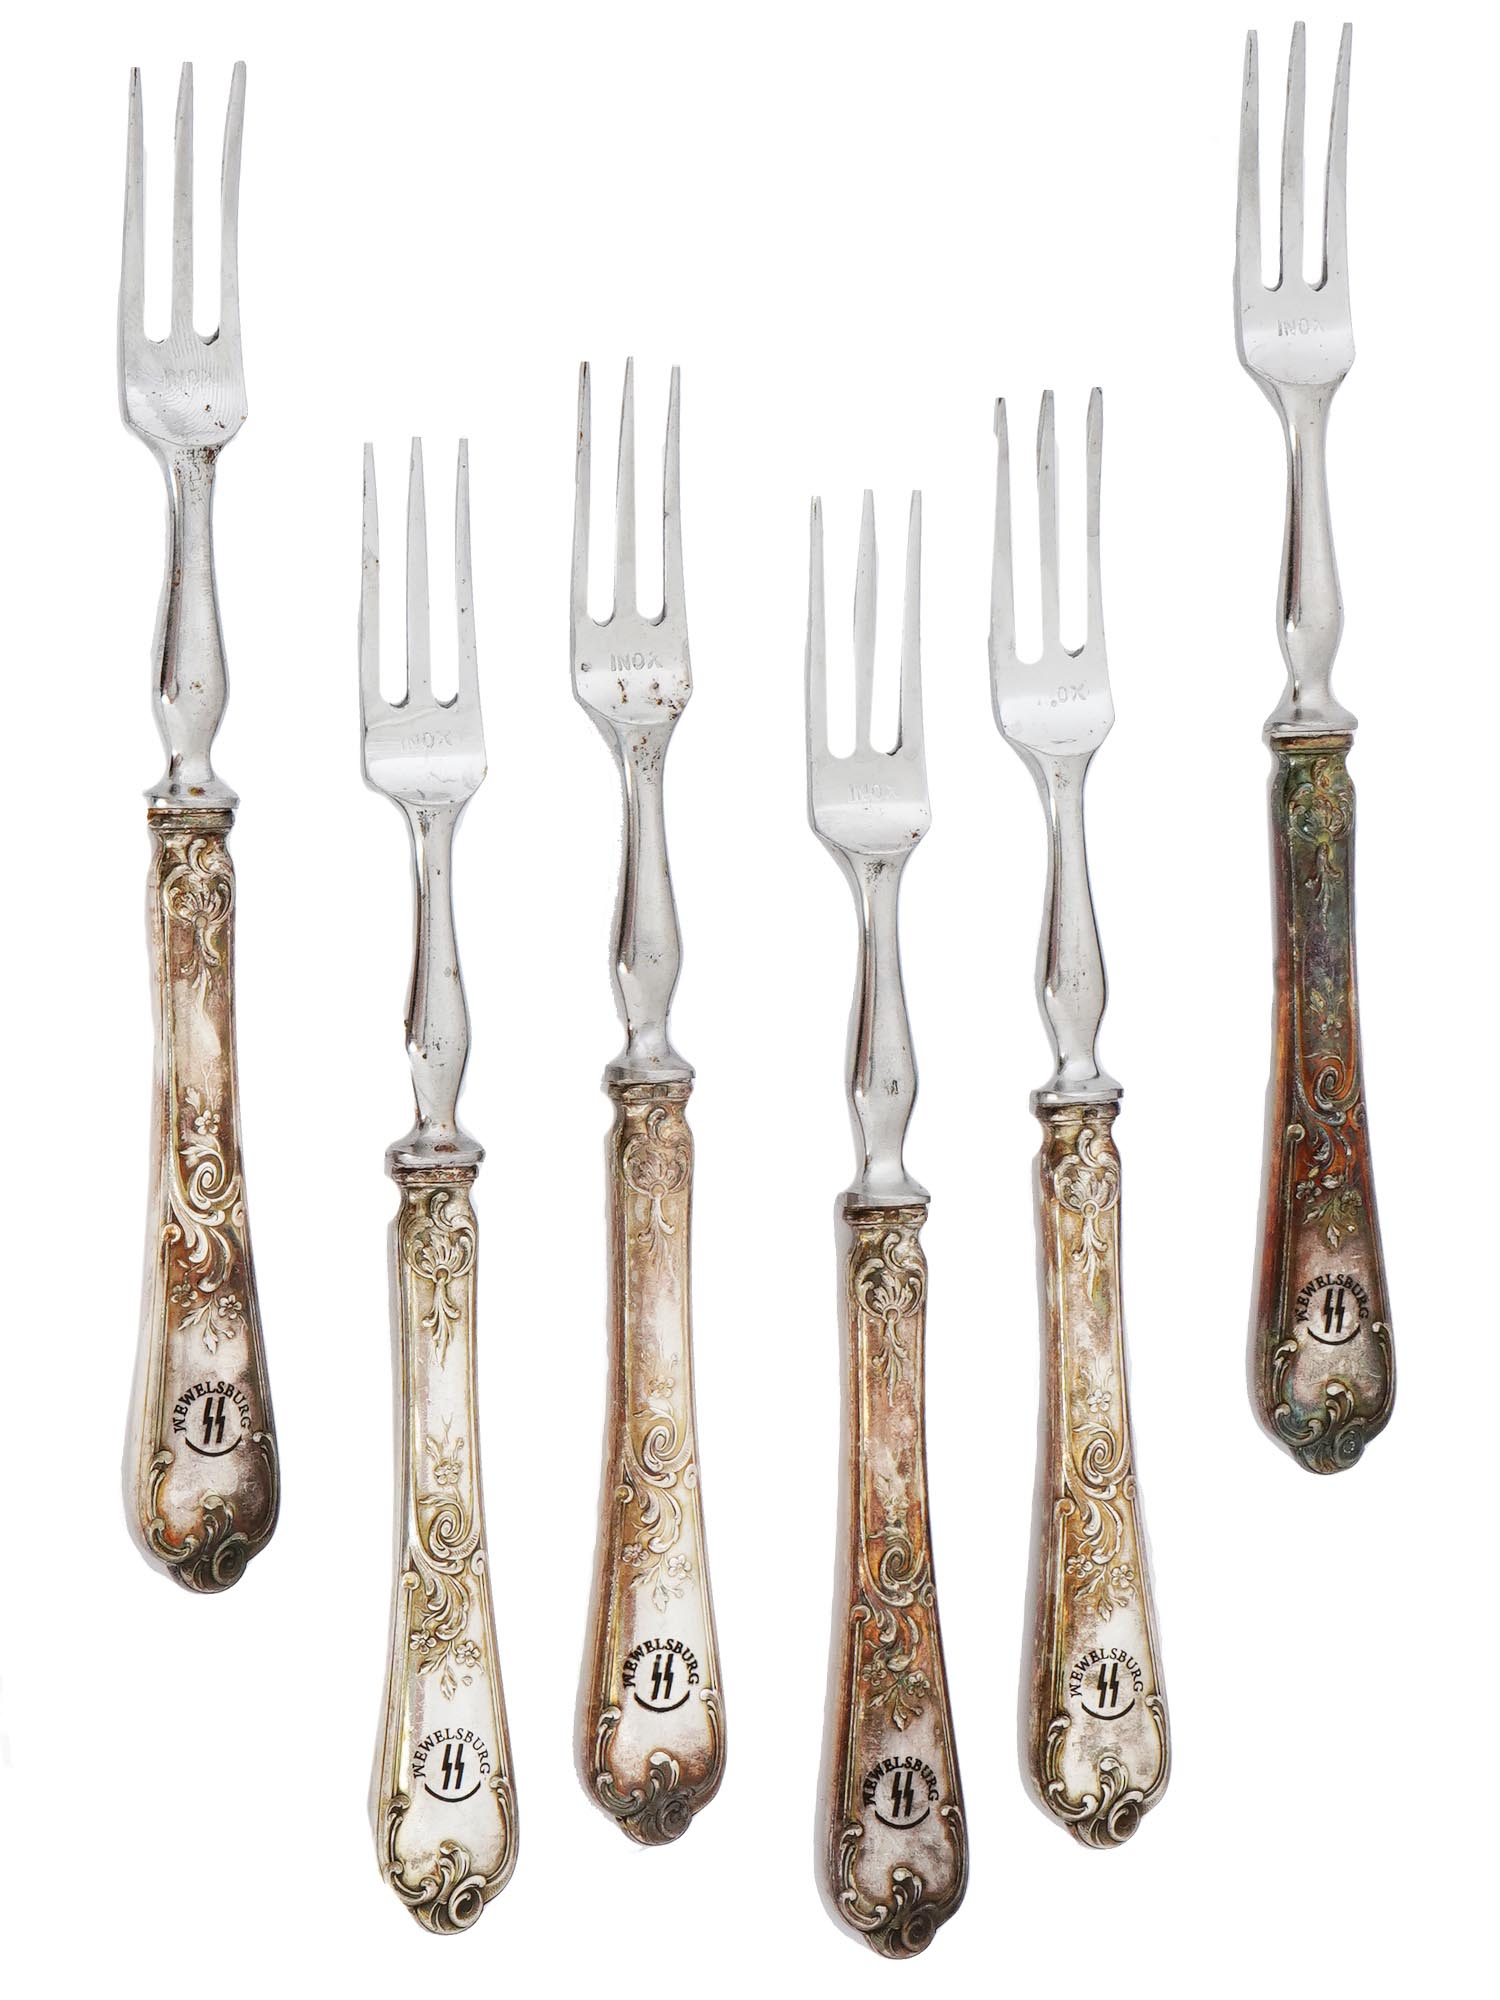 SET OF 6 DESERT FORKS FROM THE SS ACADEMY WEWELSBURG PIC-0